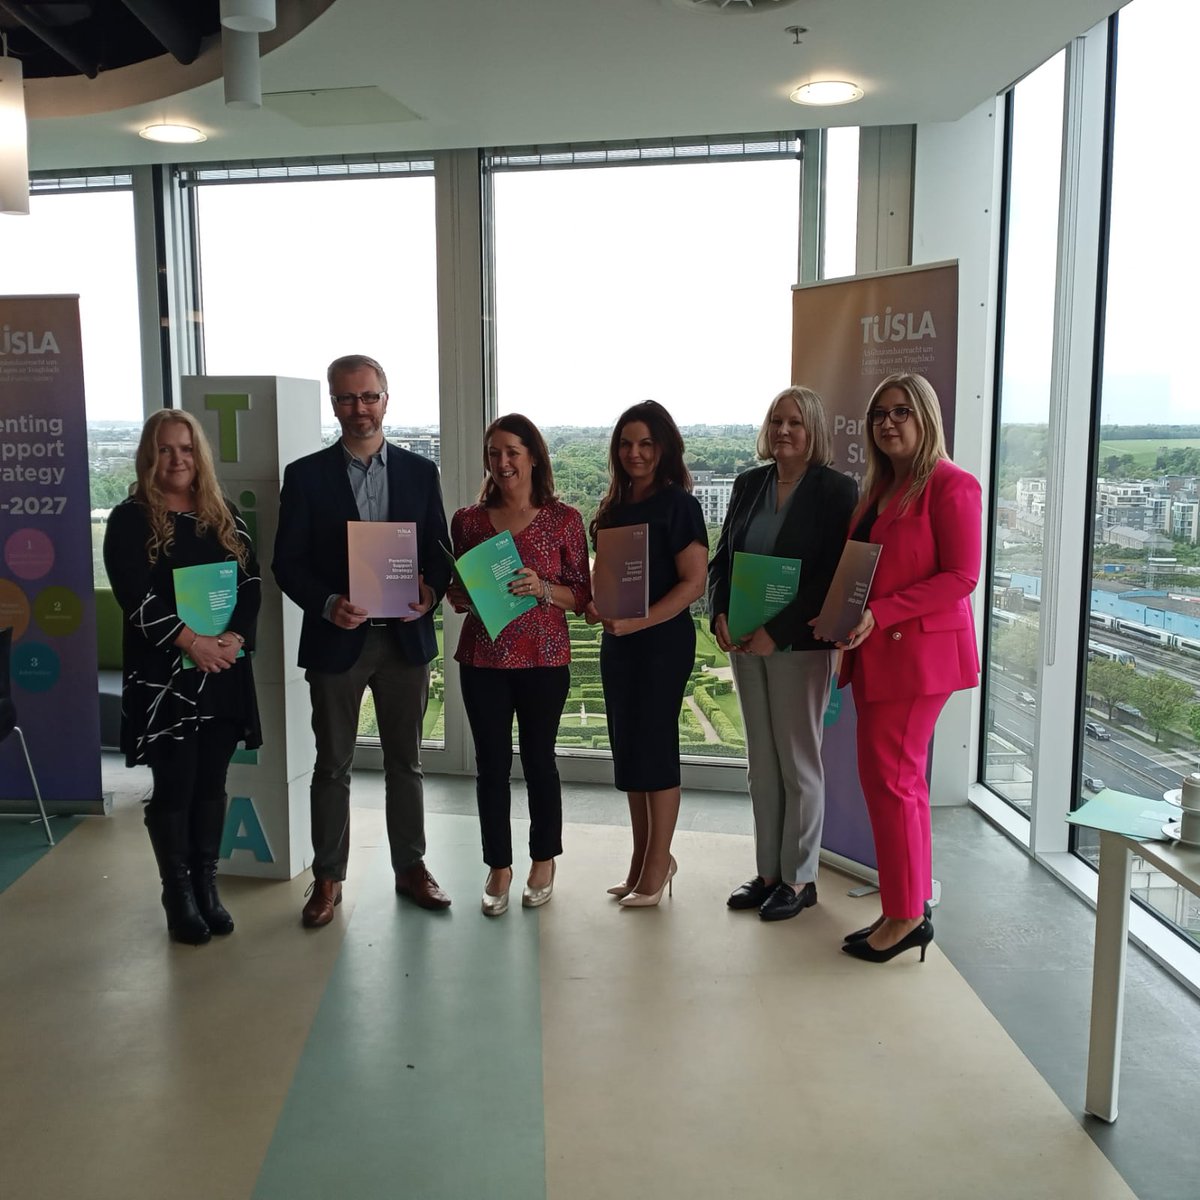 Today our Director of Services & Integration @KateDuggan8 launched the @tusla Parenting Support Strategy. We were also delighted to have Minister @rodericogorman @dcediy speak at the event & acknowledge all the great work & collaboration #parentingsupport